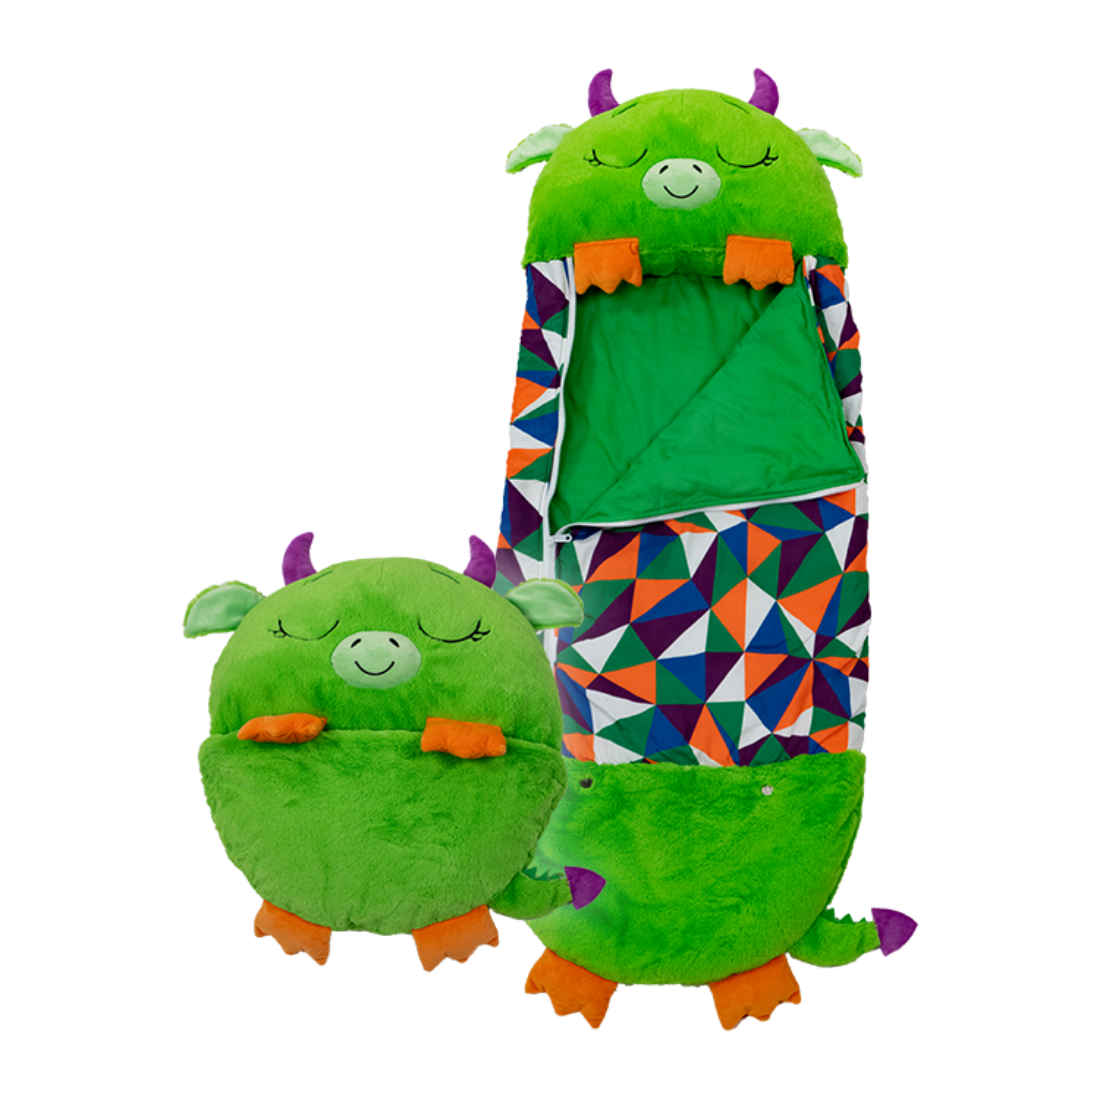 View Happy Nappers Green Dragon Large Ages 7 Plush Toy That Opens To A Fun Sleeping Bag High Street TV information